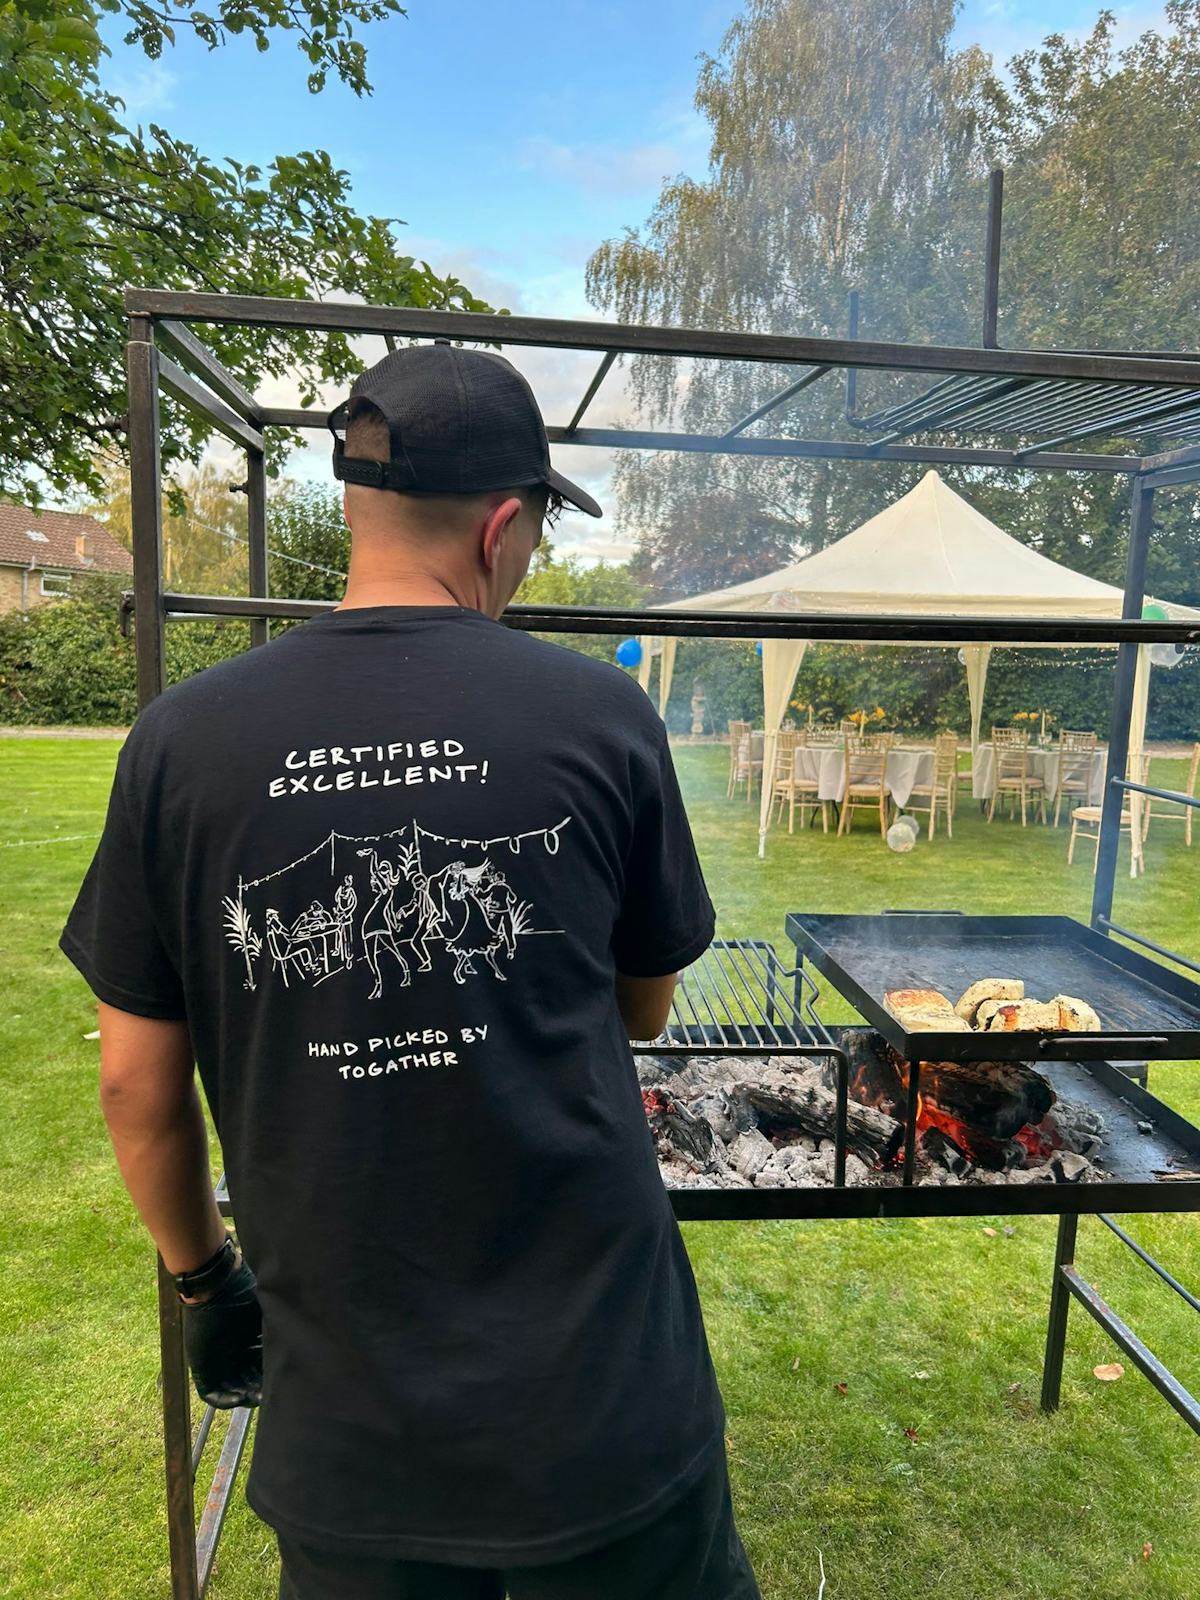 The Charcoal Grill Company